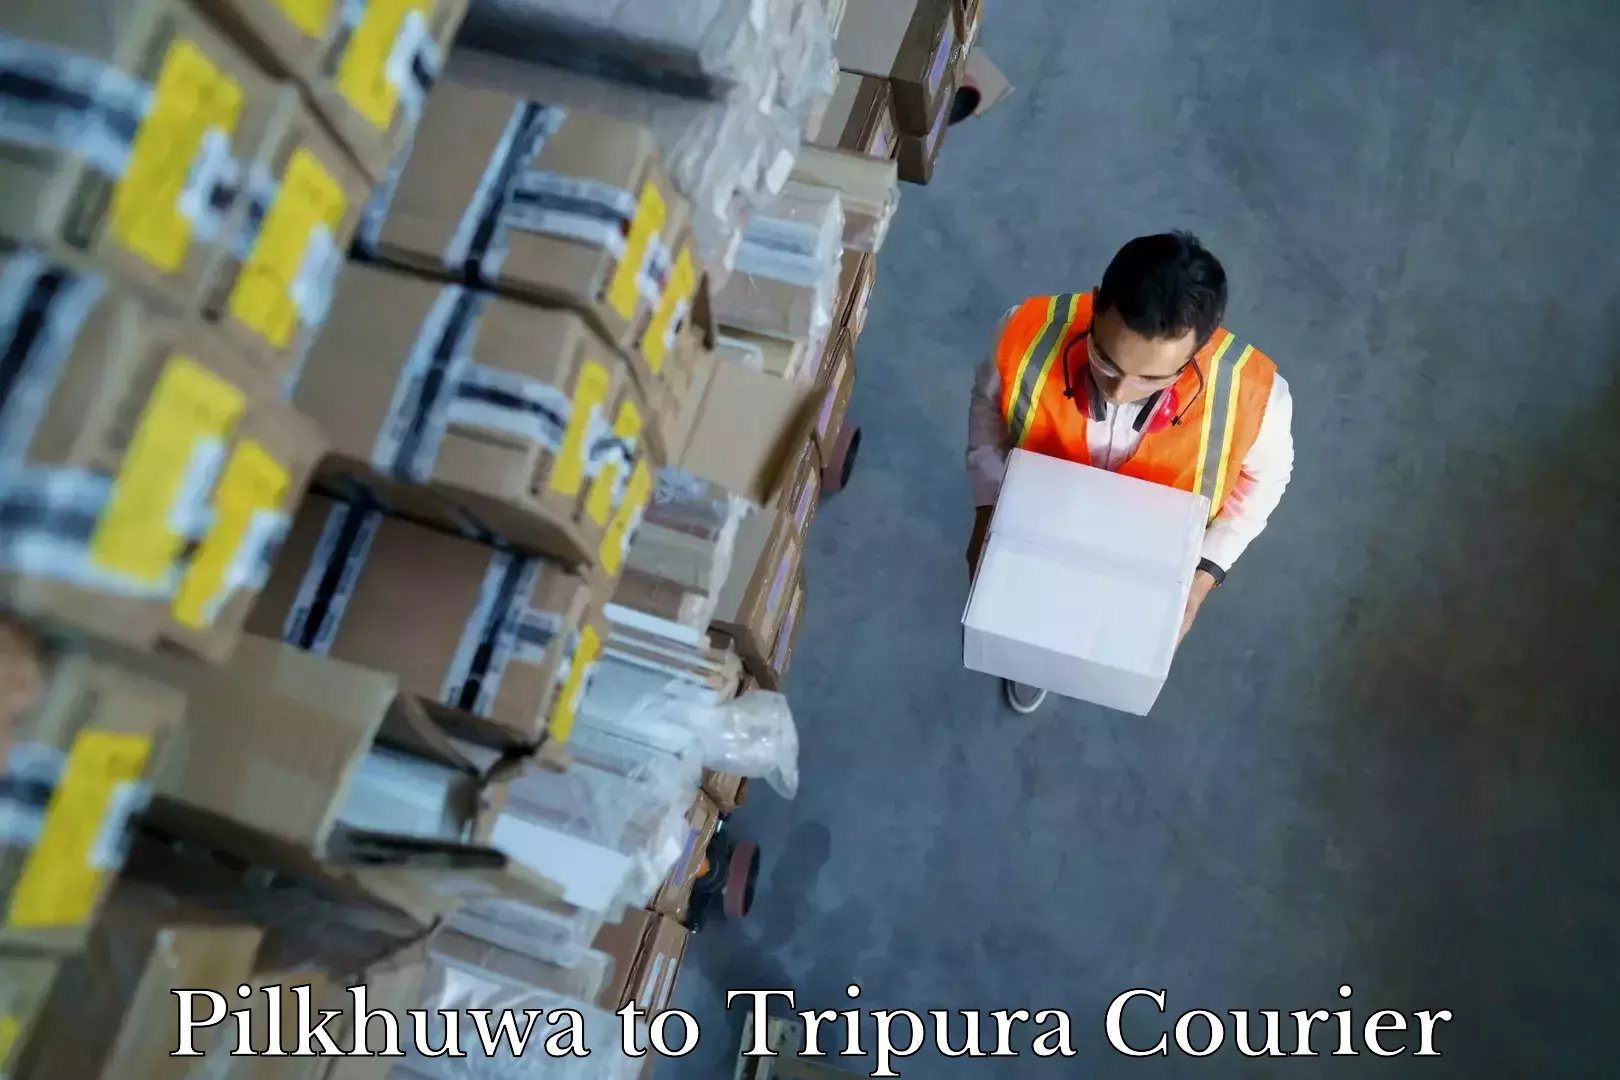 Quality relocation services Pilkhuwa to North Tripura